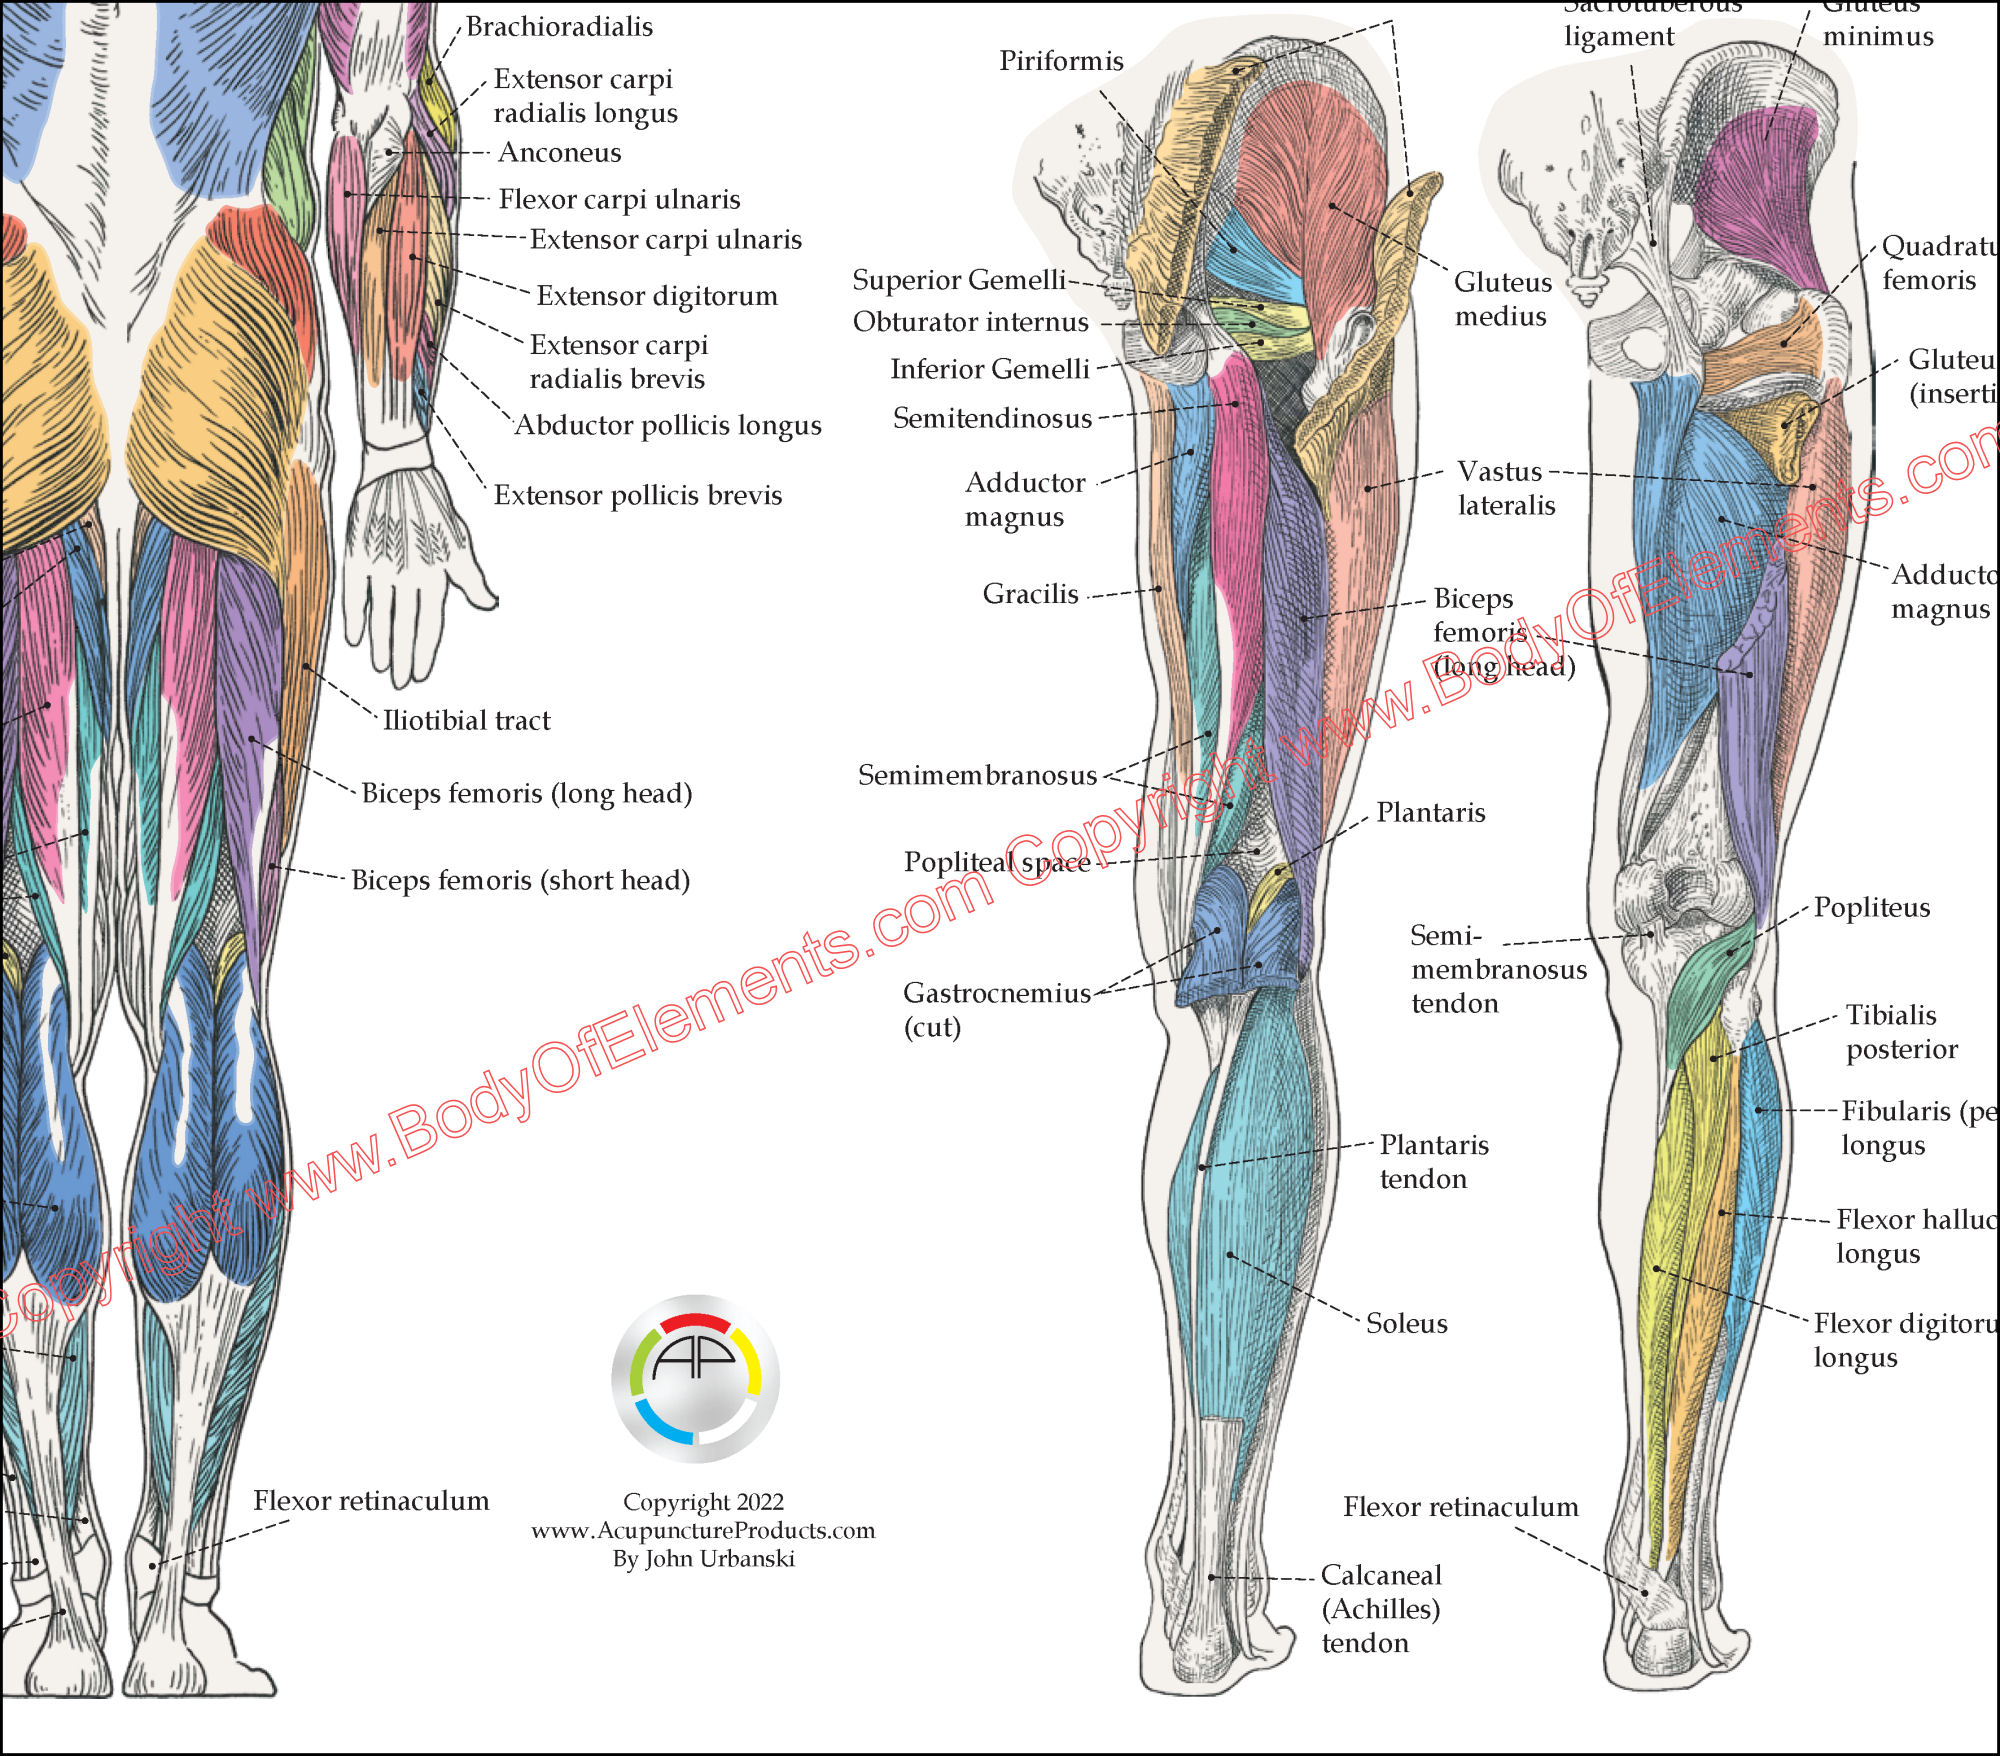 Muscle Anatomy Poster